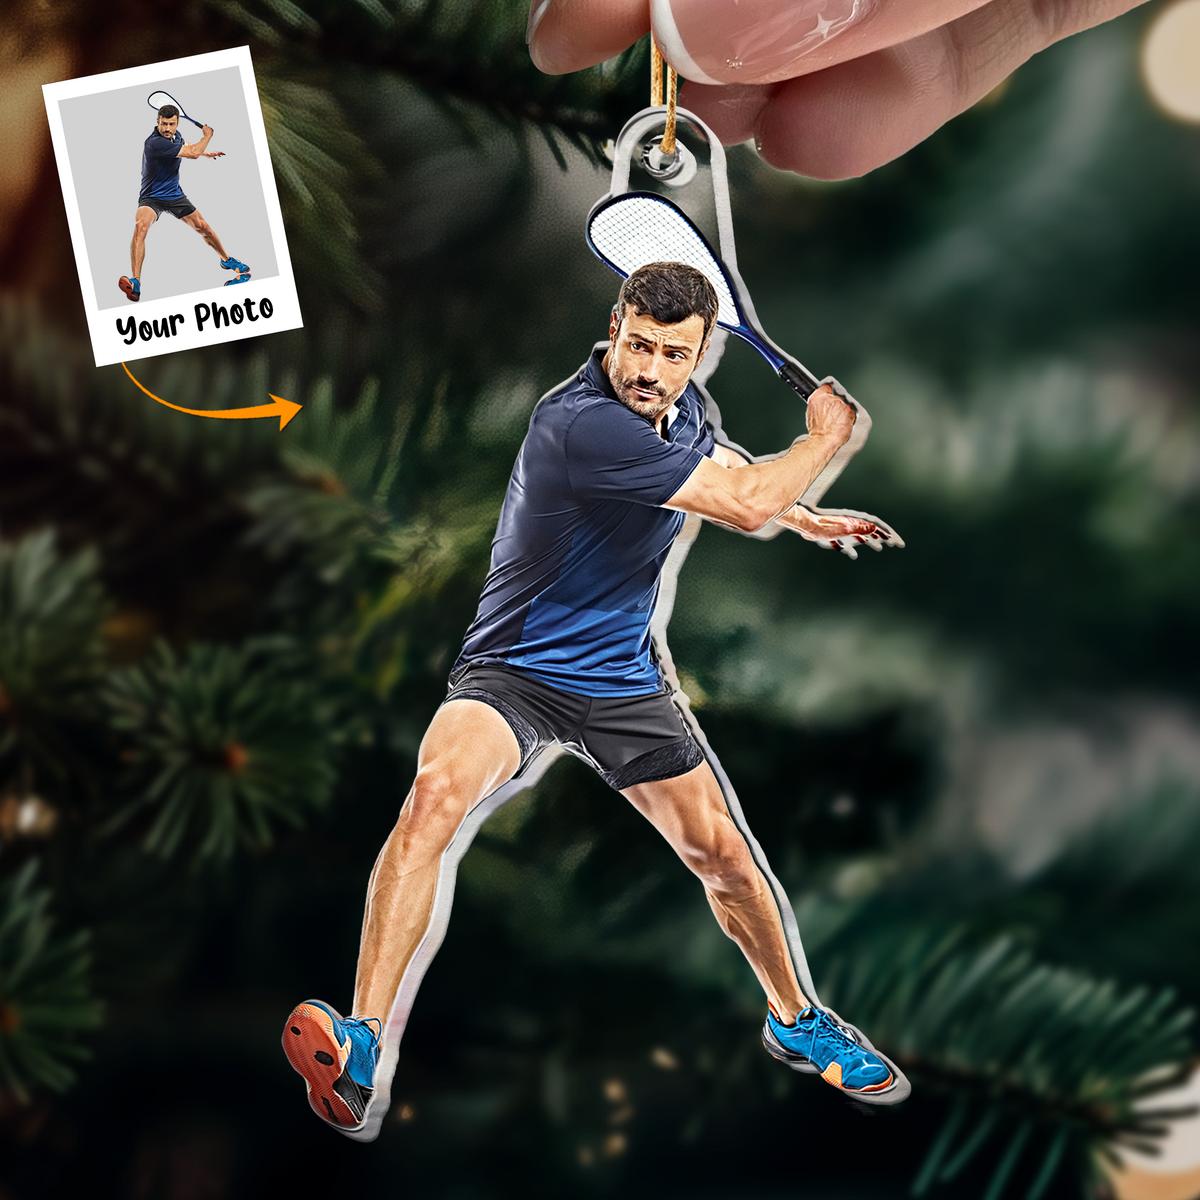 Personalized Acrylic Tennis Photo Ornament, Custom Your Great Memories Of Tennis Photo Acrylic Ornament For Christmas, Best Gift For Tennis Lovers